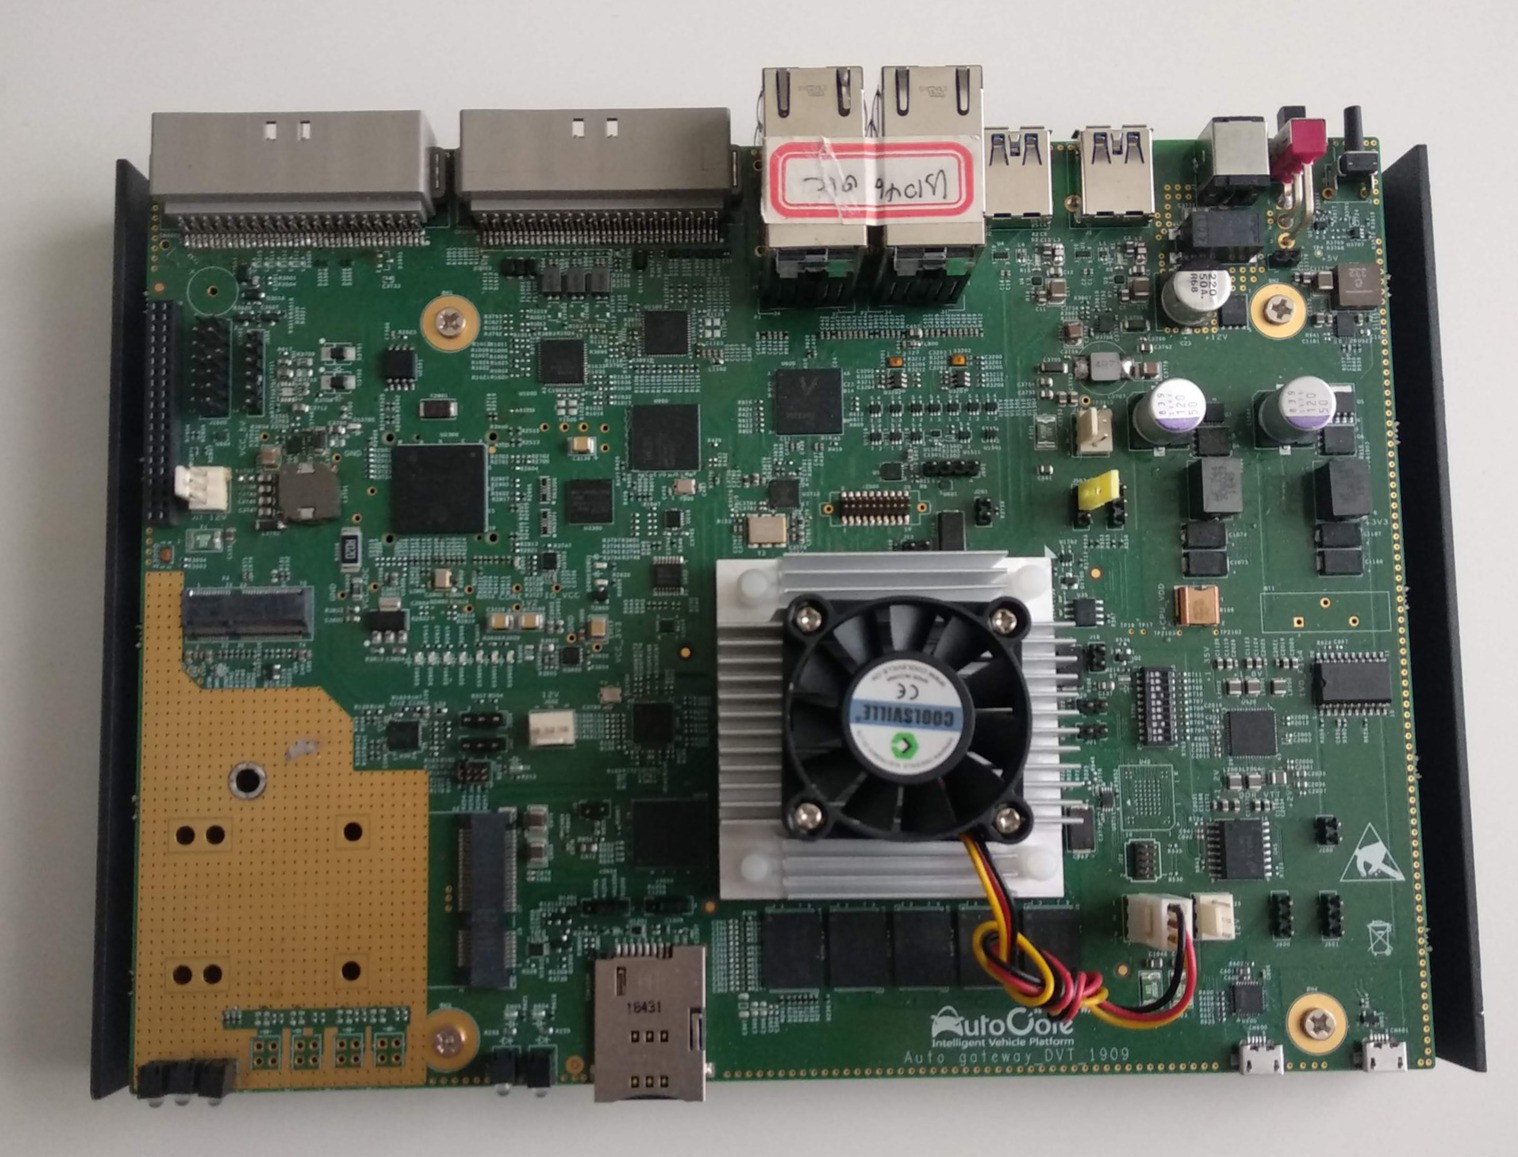 First look at AutoCore’s PCU